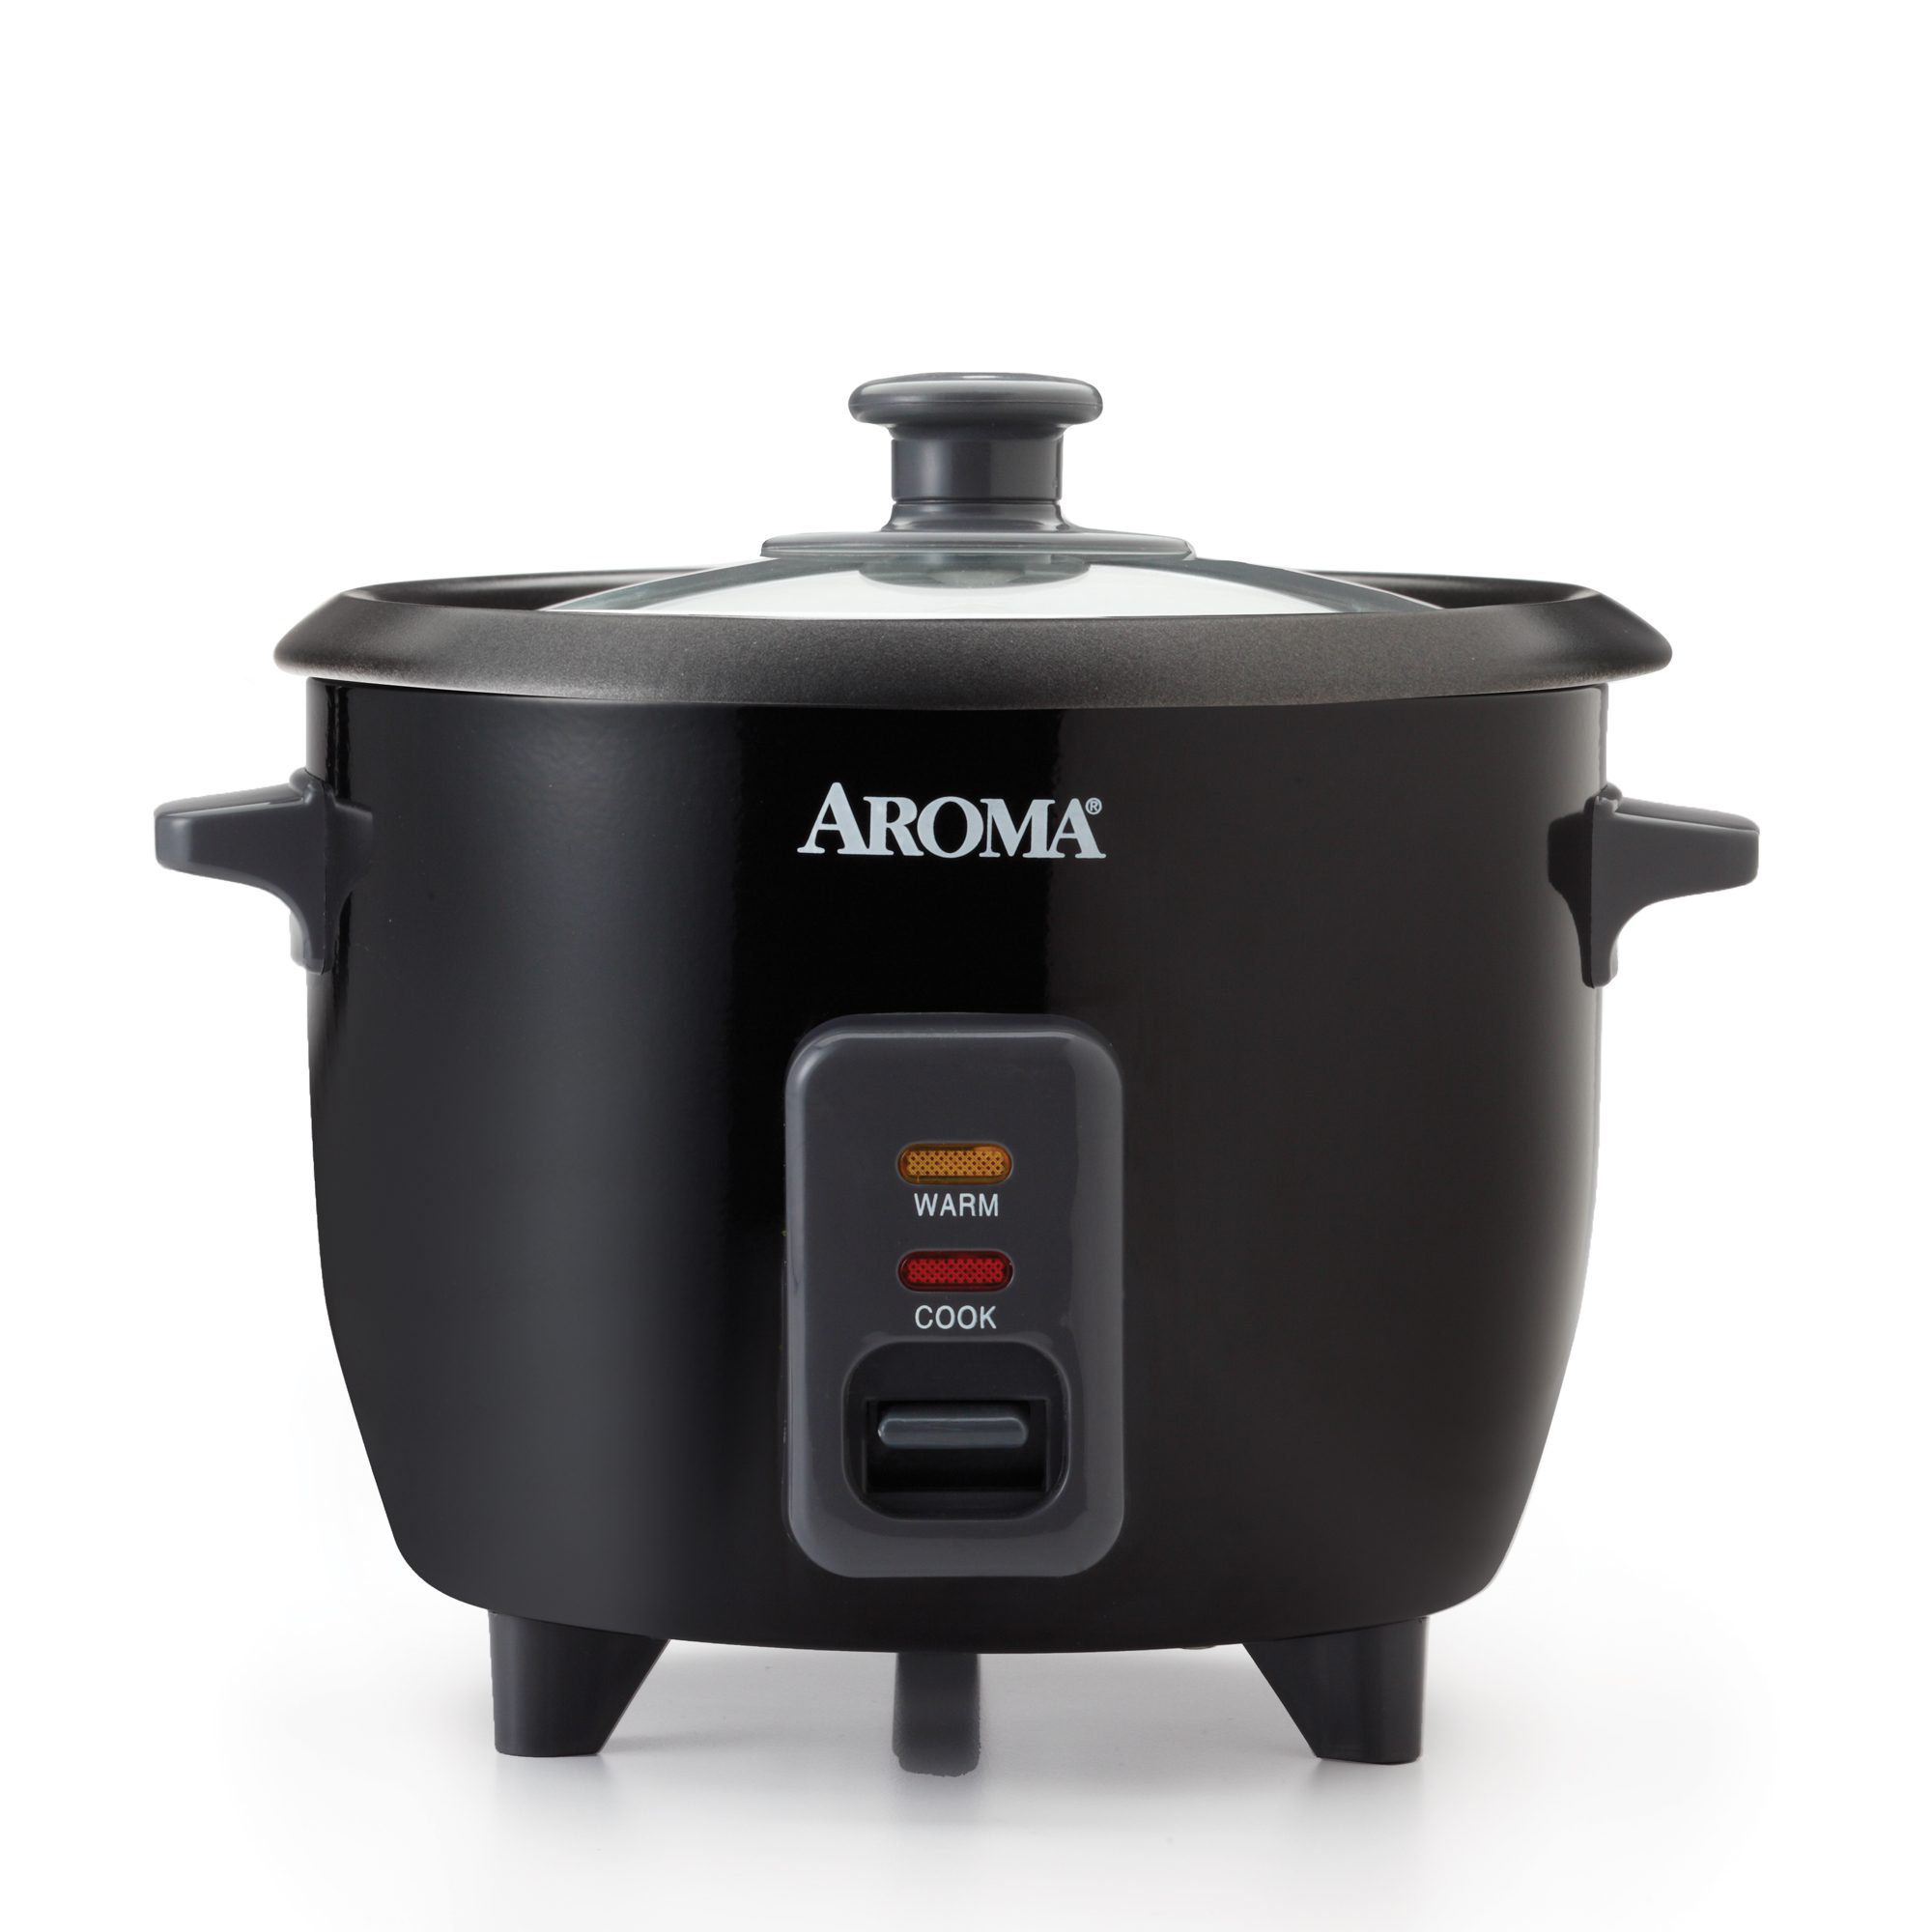 Aroma Rice and Grain Cooker, 1.5 qt. BPA Free. One-Touch Operation